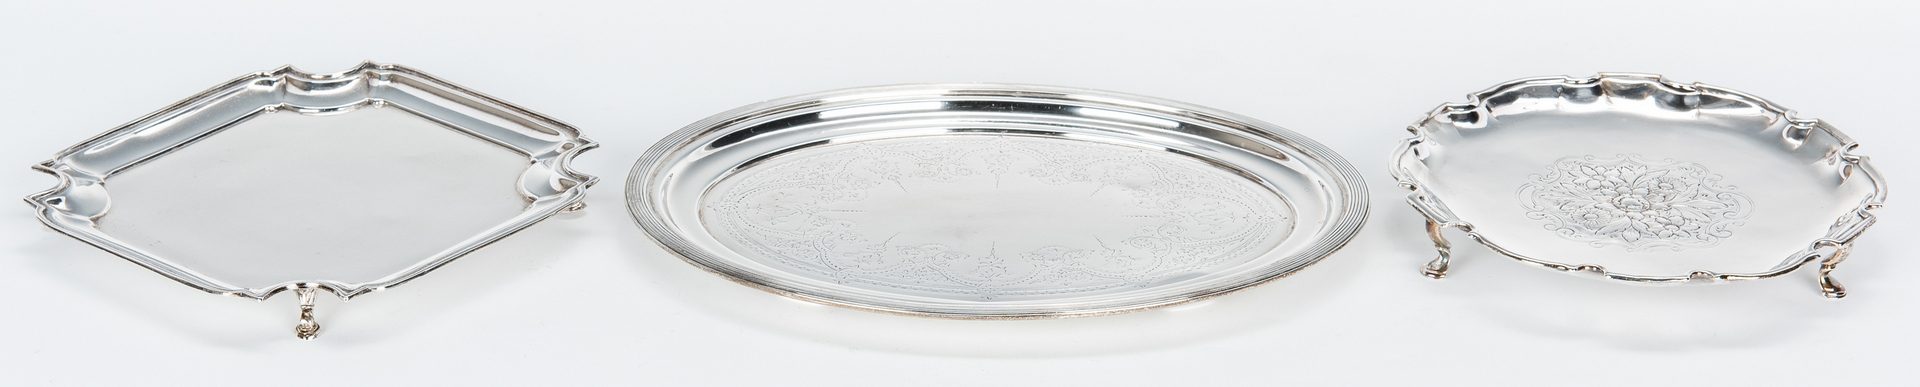 Lot 659: 3 Small Sterling Silver Trays